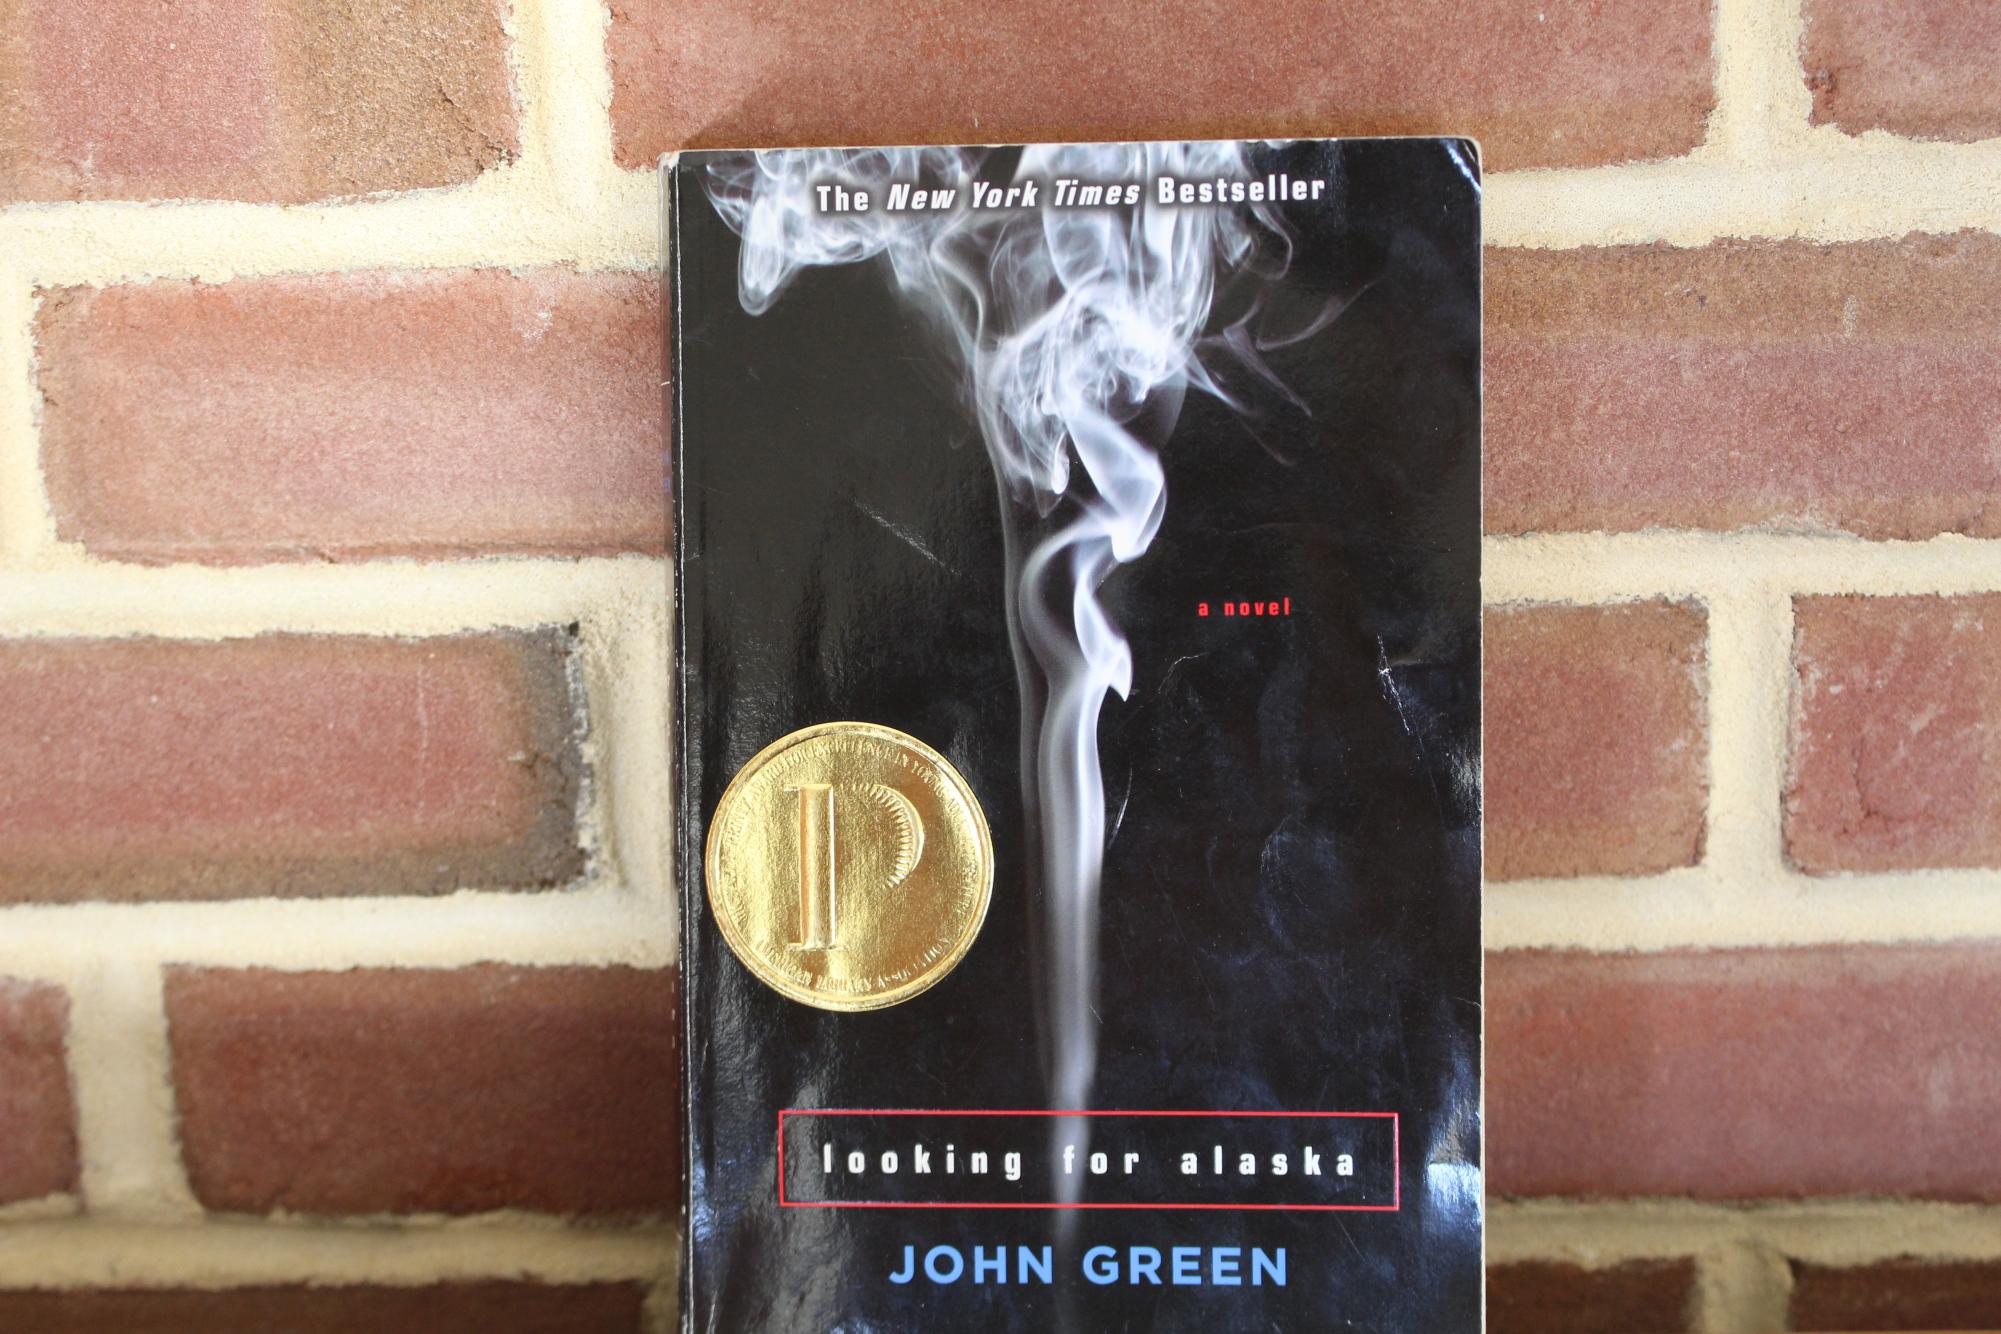 Looking for Alaska by John Green demonstrates the grief felt by teenagers when a life is cut short. 